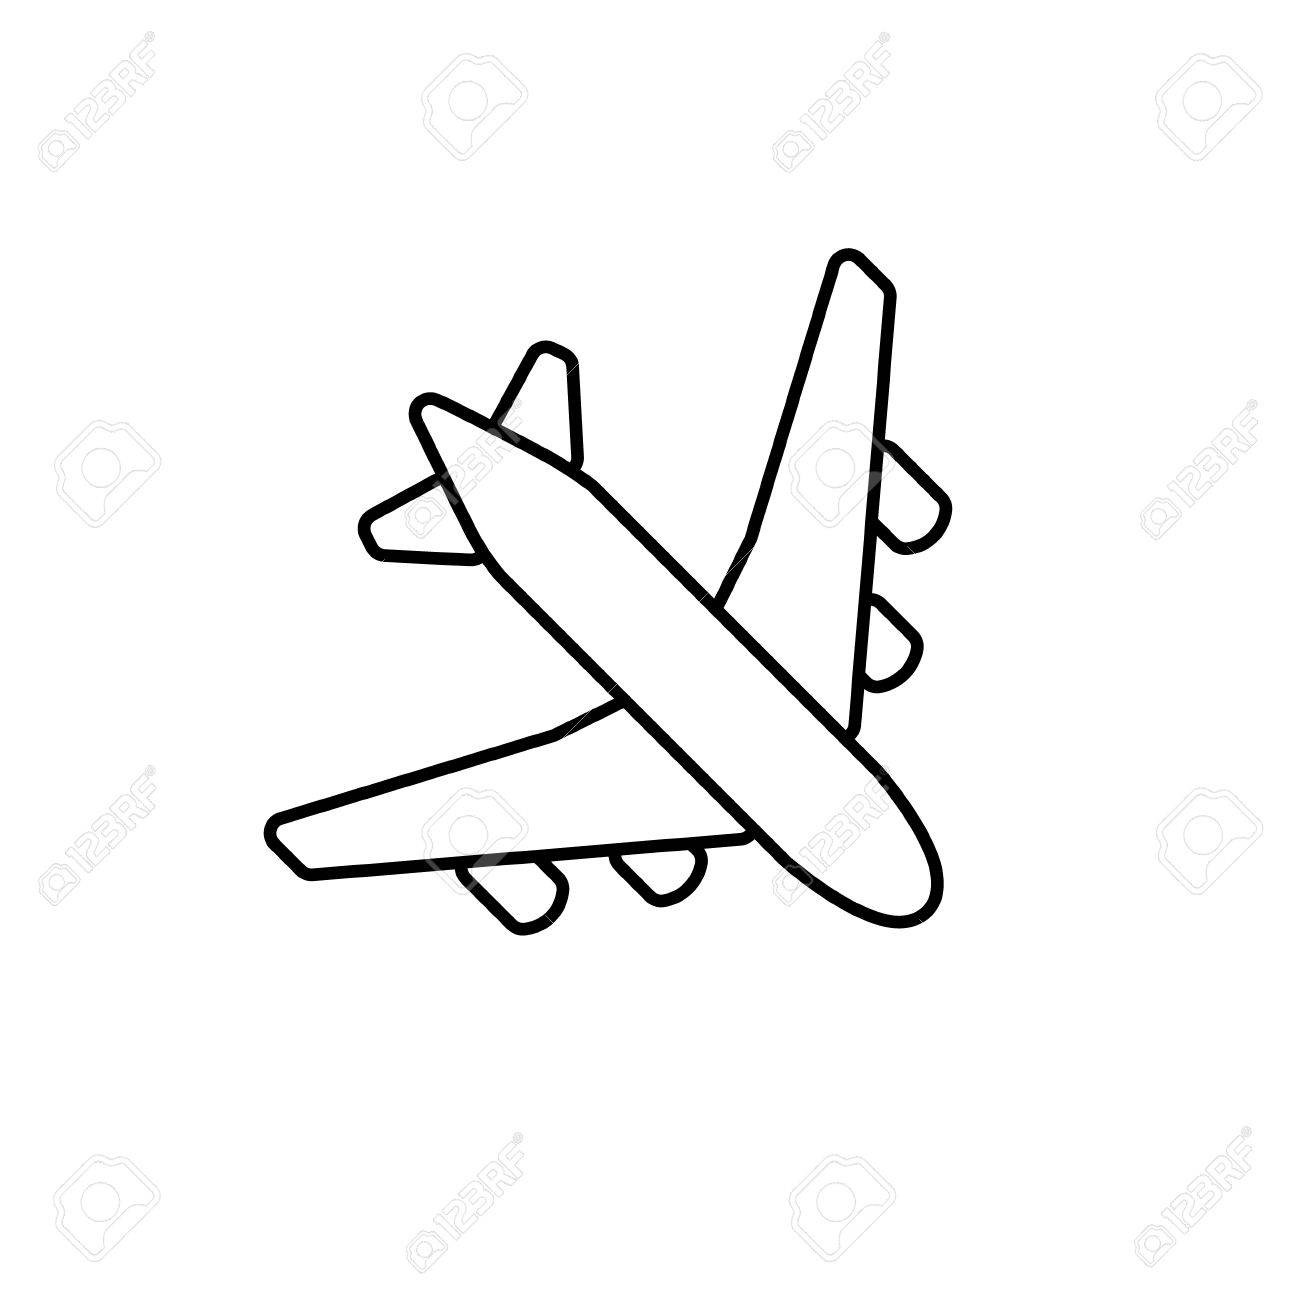 steps to draw simple airplane